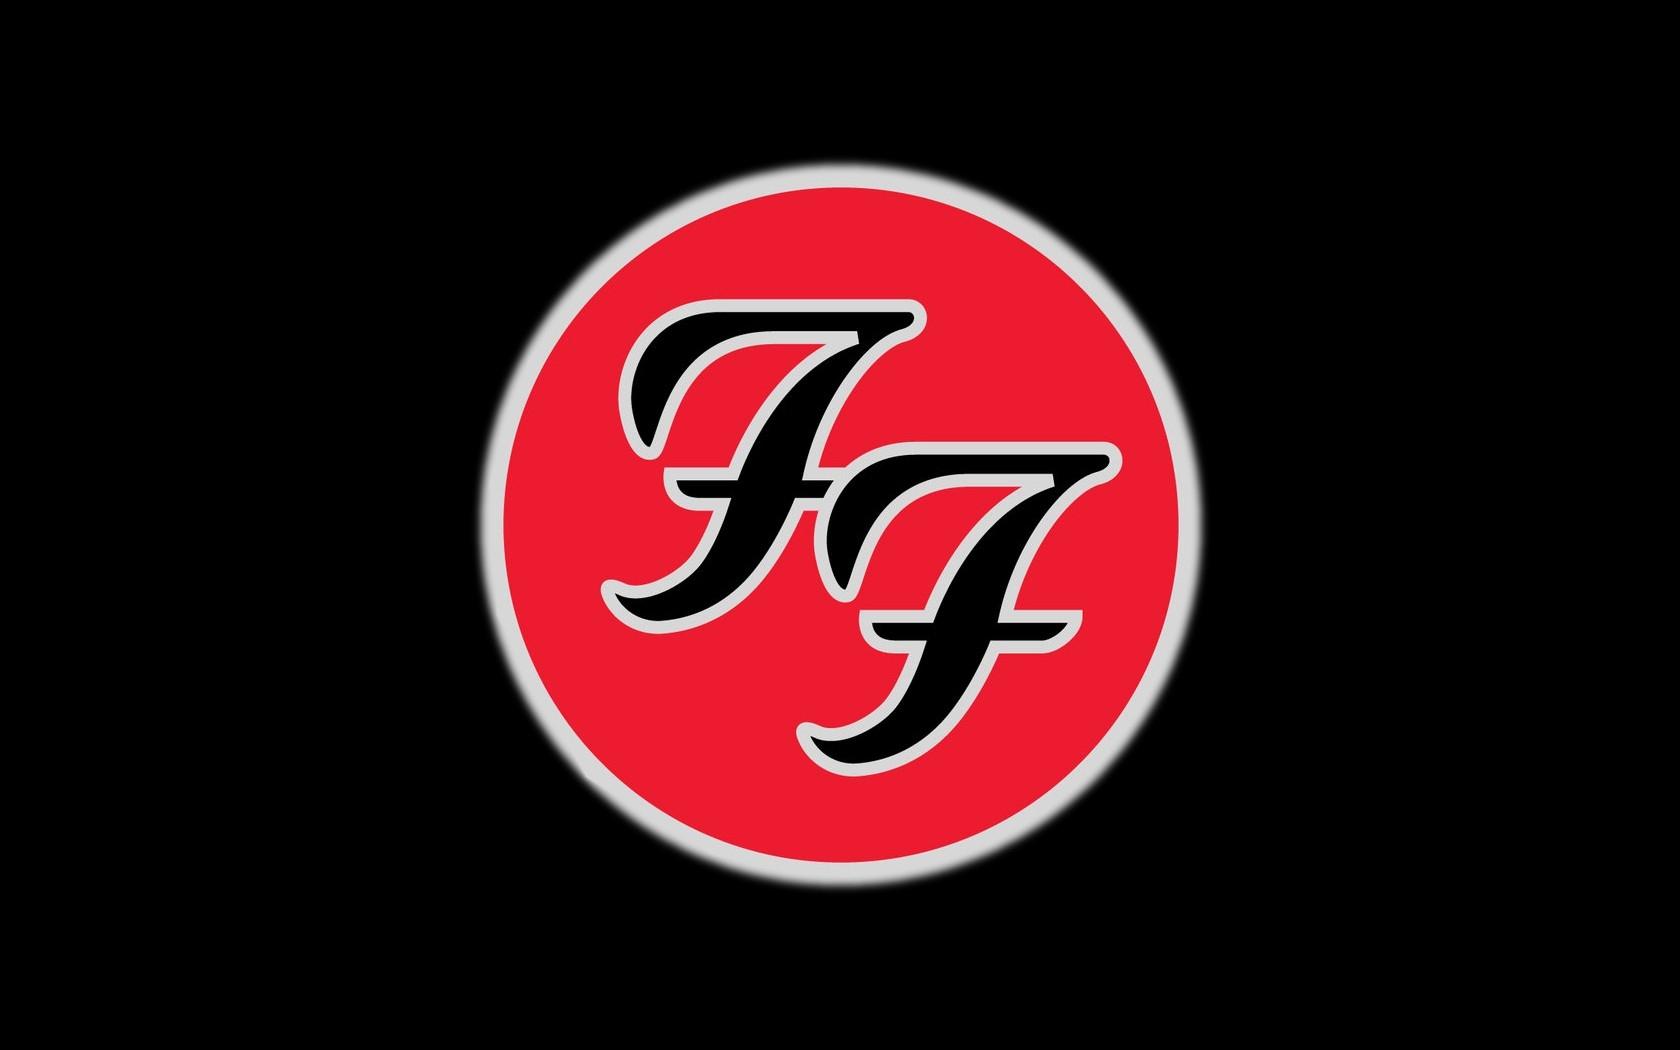 Wallpaper, red, text, logo, sign, circle, brand, Foo Fighters, icon